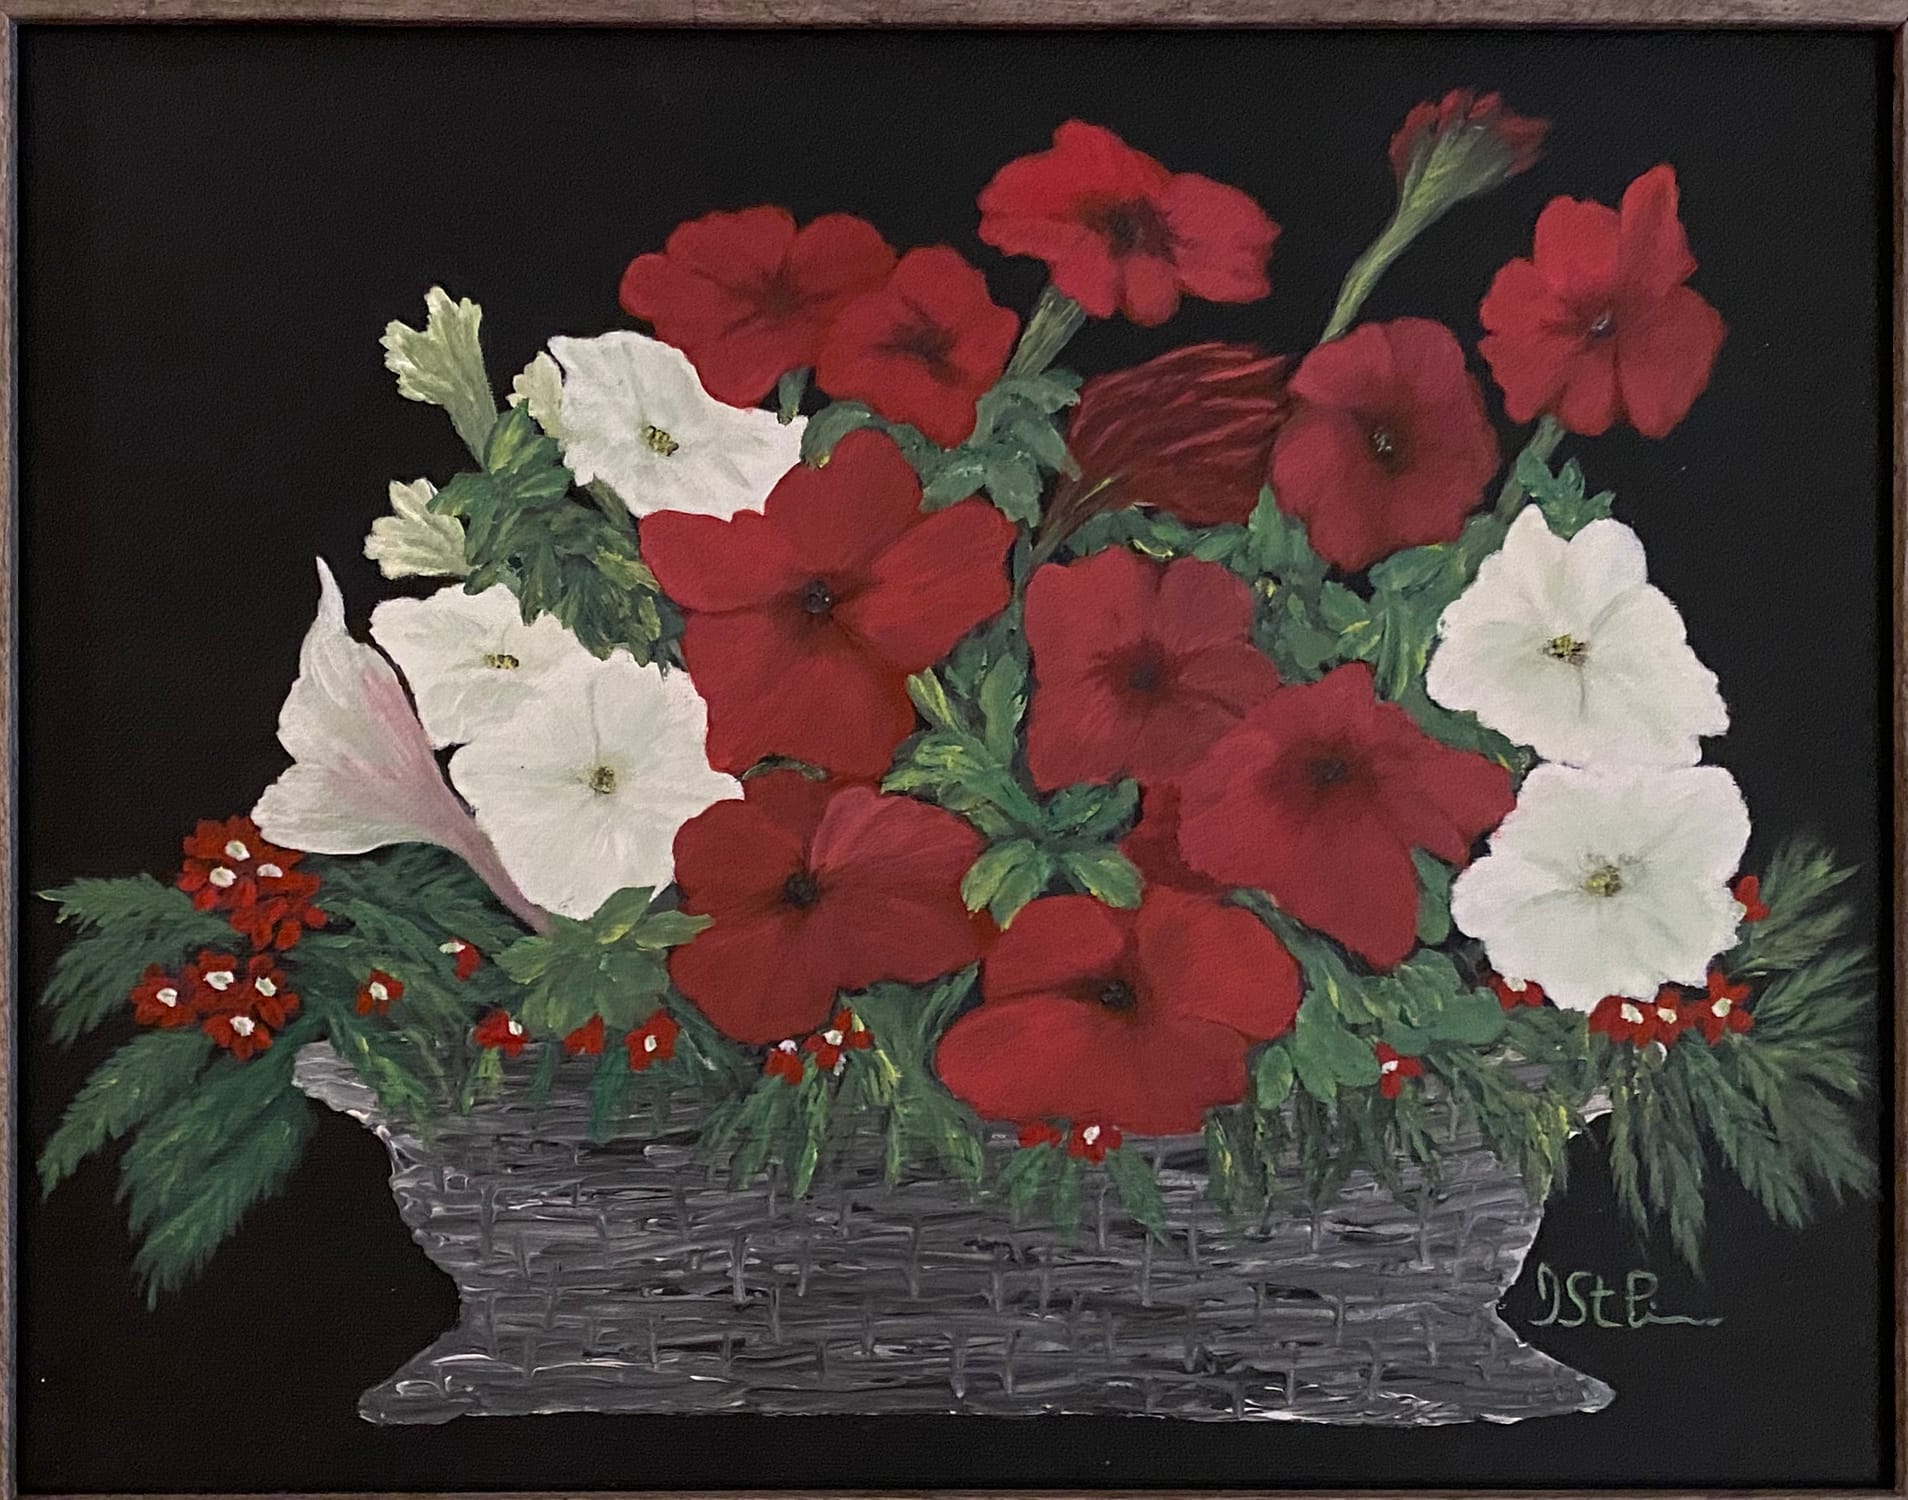 Painting of red and white petunia flowers in a basket